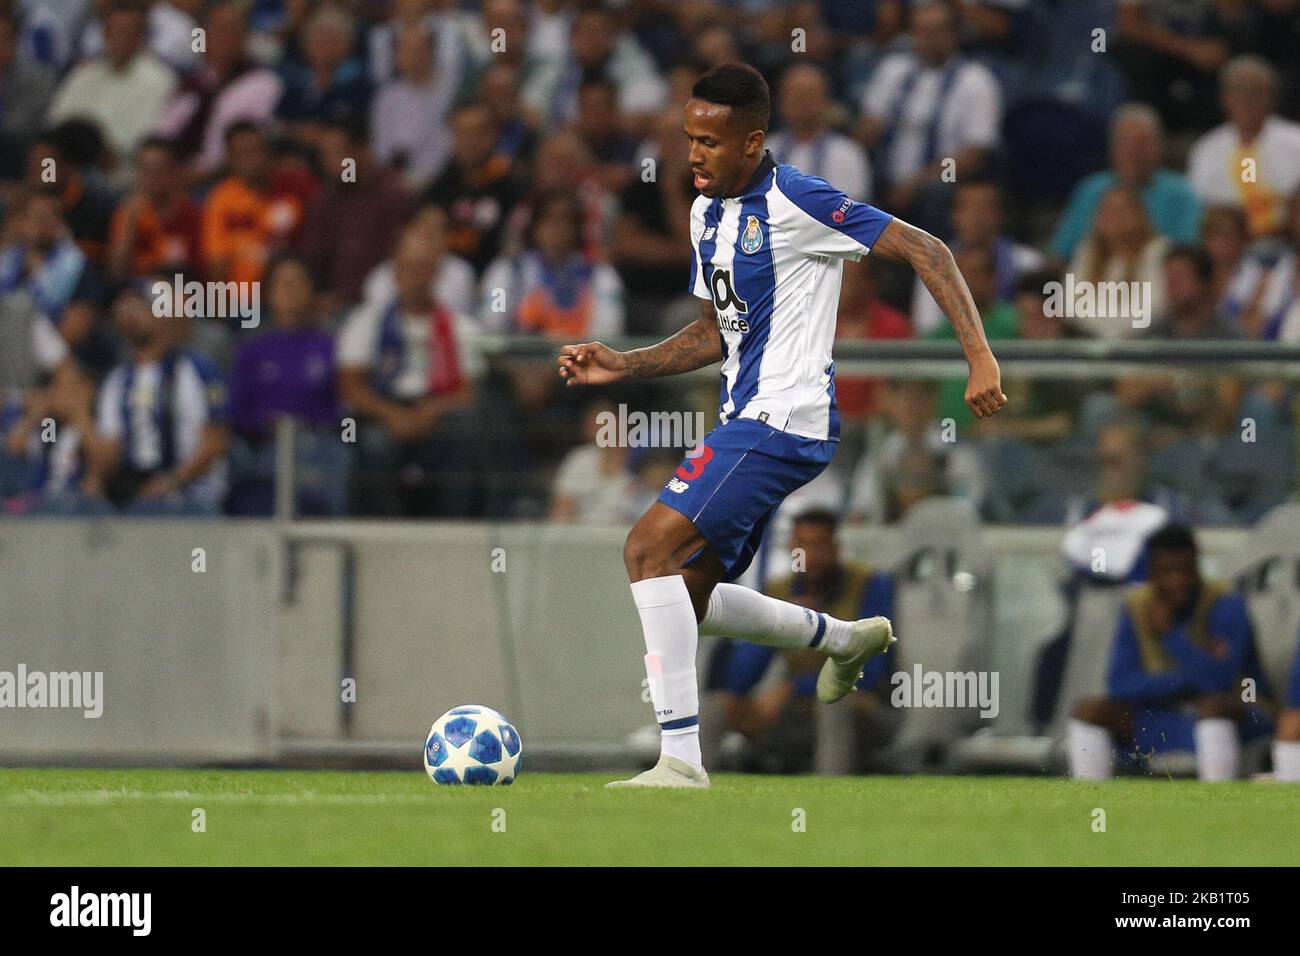 Porto's Brazilian defender Eder Militao in action during the UEFA Champions League, match between FC Porto and Galatasaray, at Dragao Stadium in Porto on October 3, 2018 in Porto, Portugal. (Photo by Paulo Oliveira / DPI / NurPhoto) Stock Photo